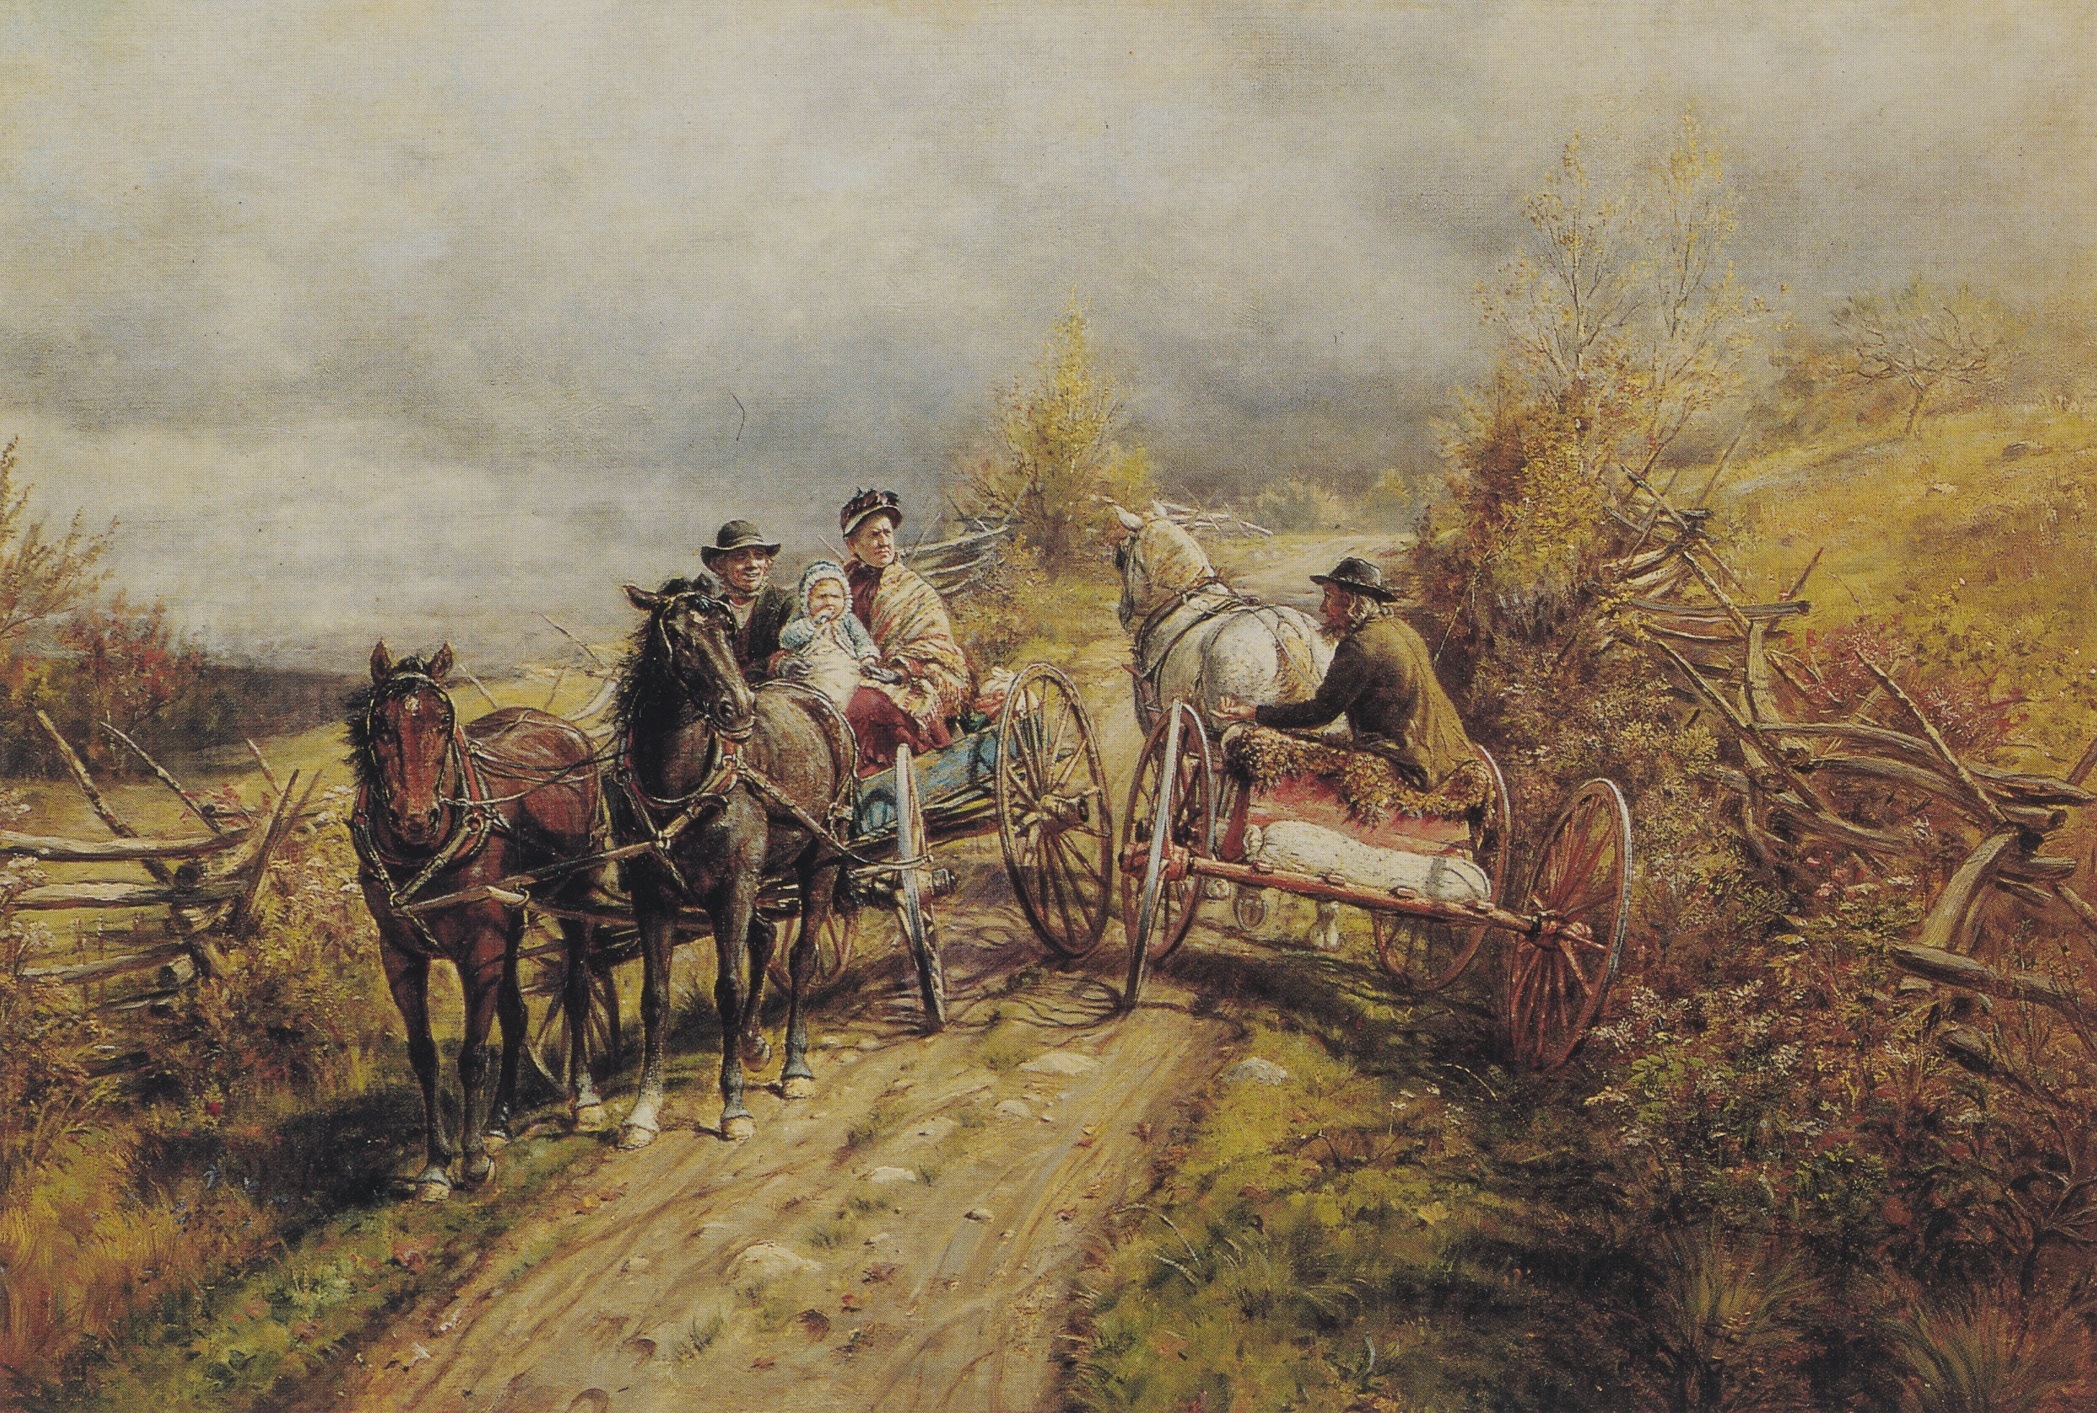 header image showing 2 groups meeting as their horse-drawn carriages pass each other in a field